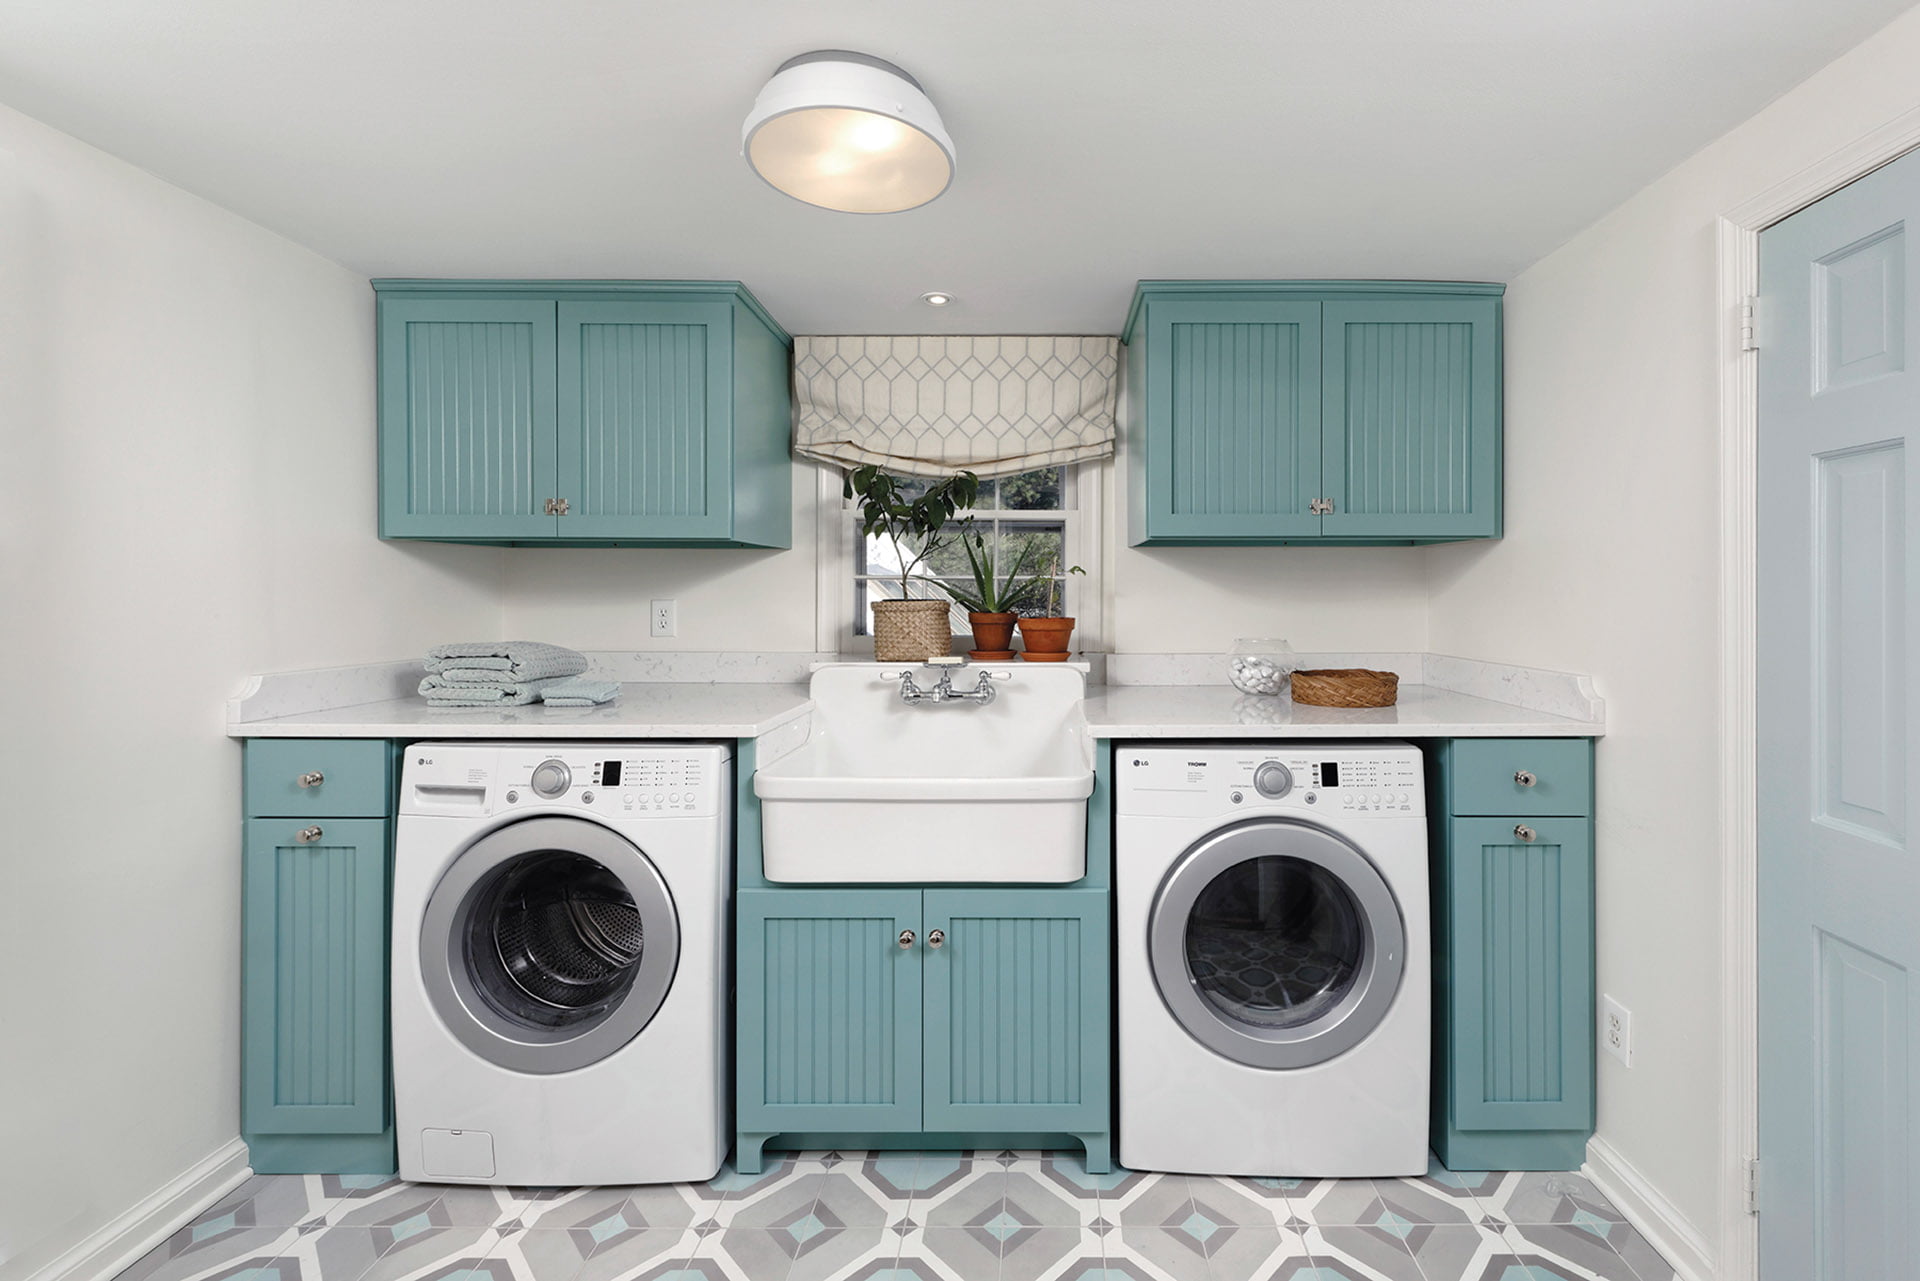 Low-slung laundry sink centers a wall of cabinets and appliances in the laundry room.